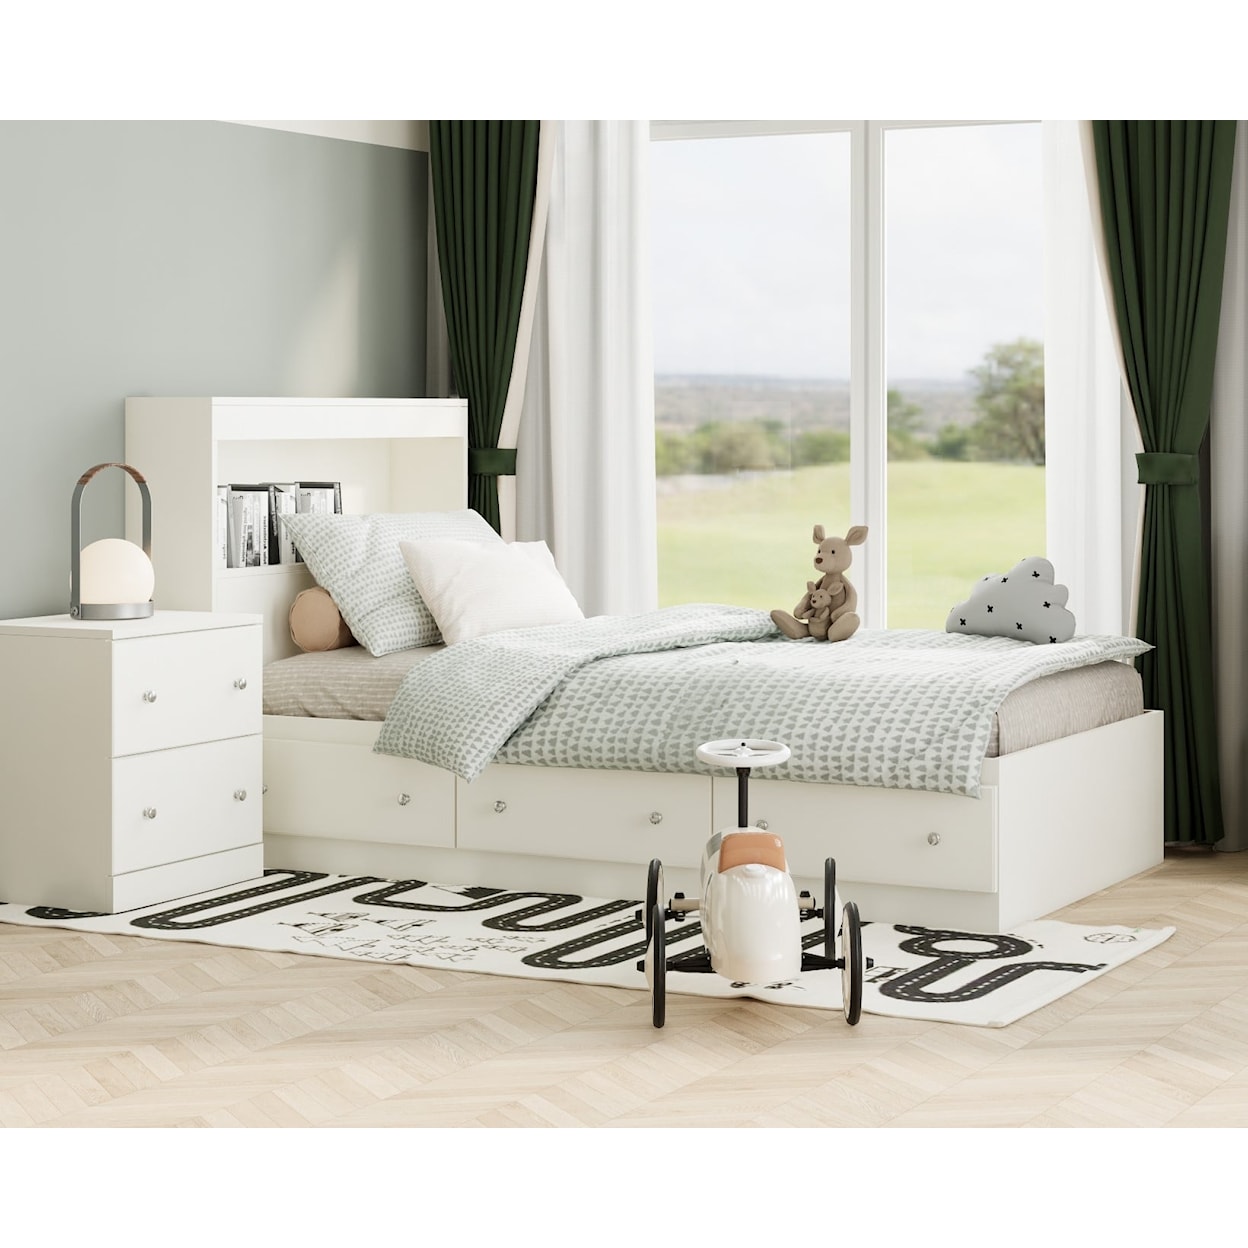 Perdue 17000 Twin Mates Bed with Bookcase Headboard